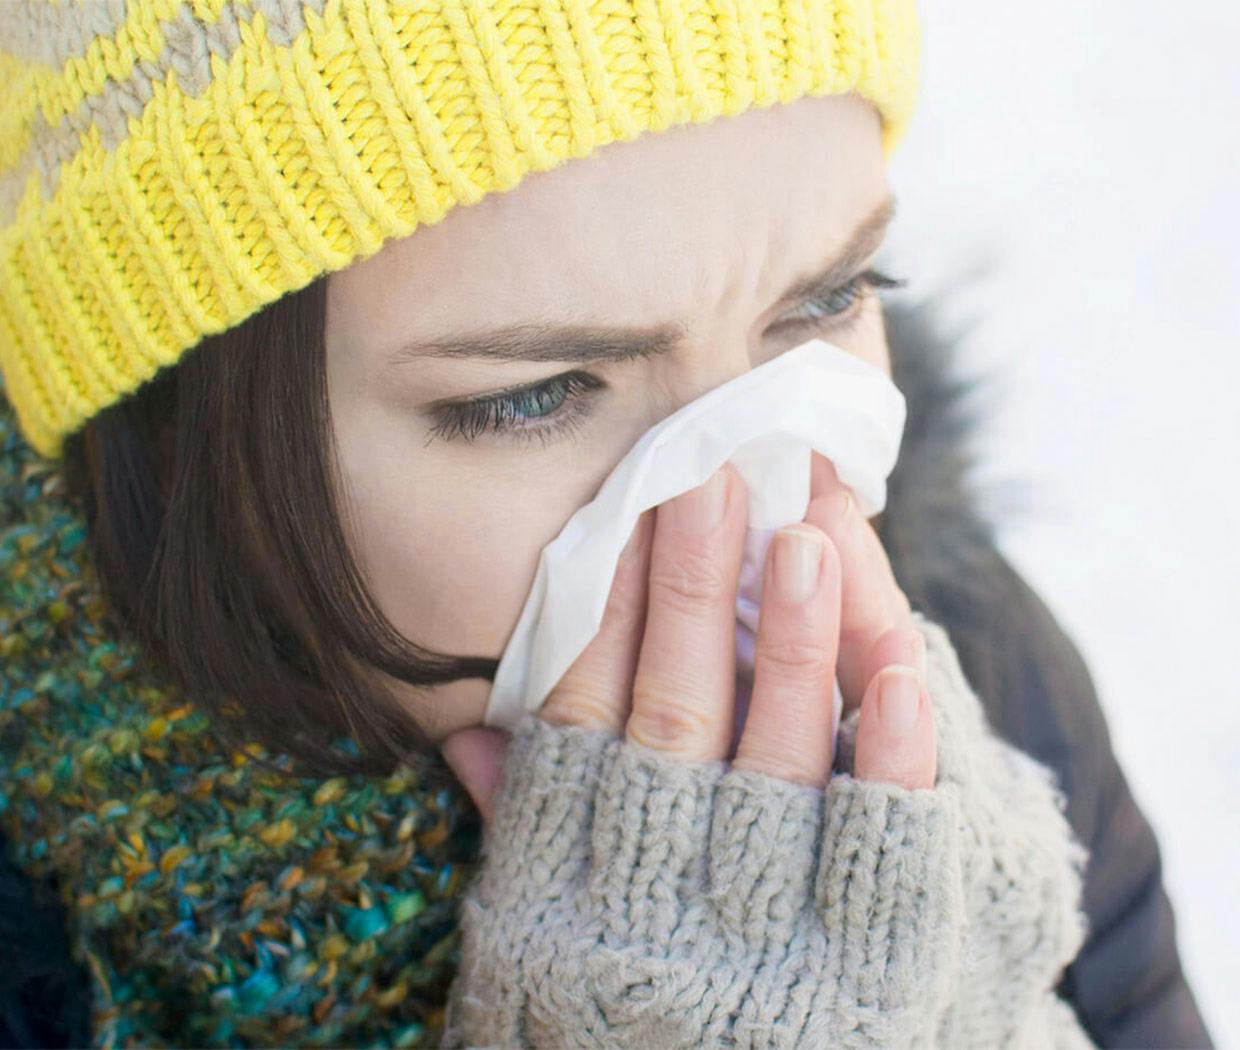 Woman dressed in winter clothing blowing her nose